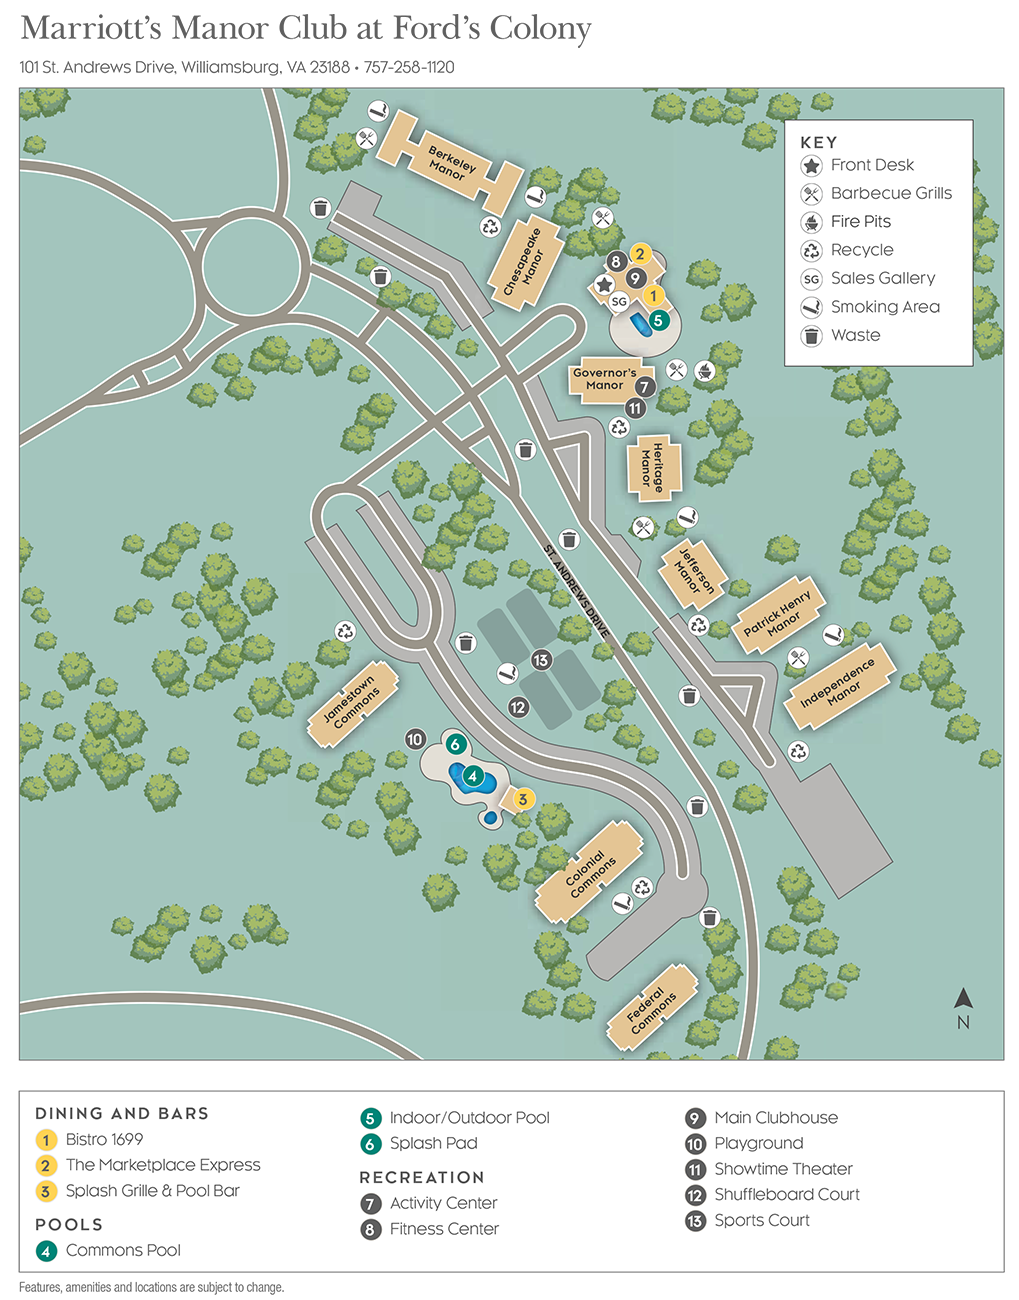 Marriott Manor Club at Ford's Colony Resort Map